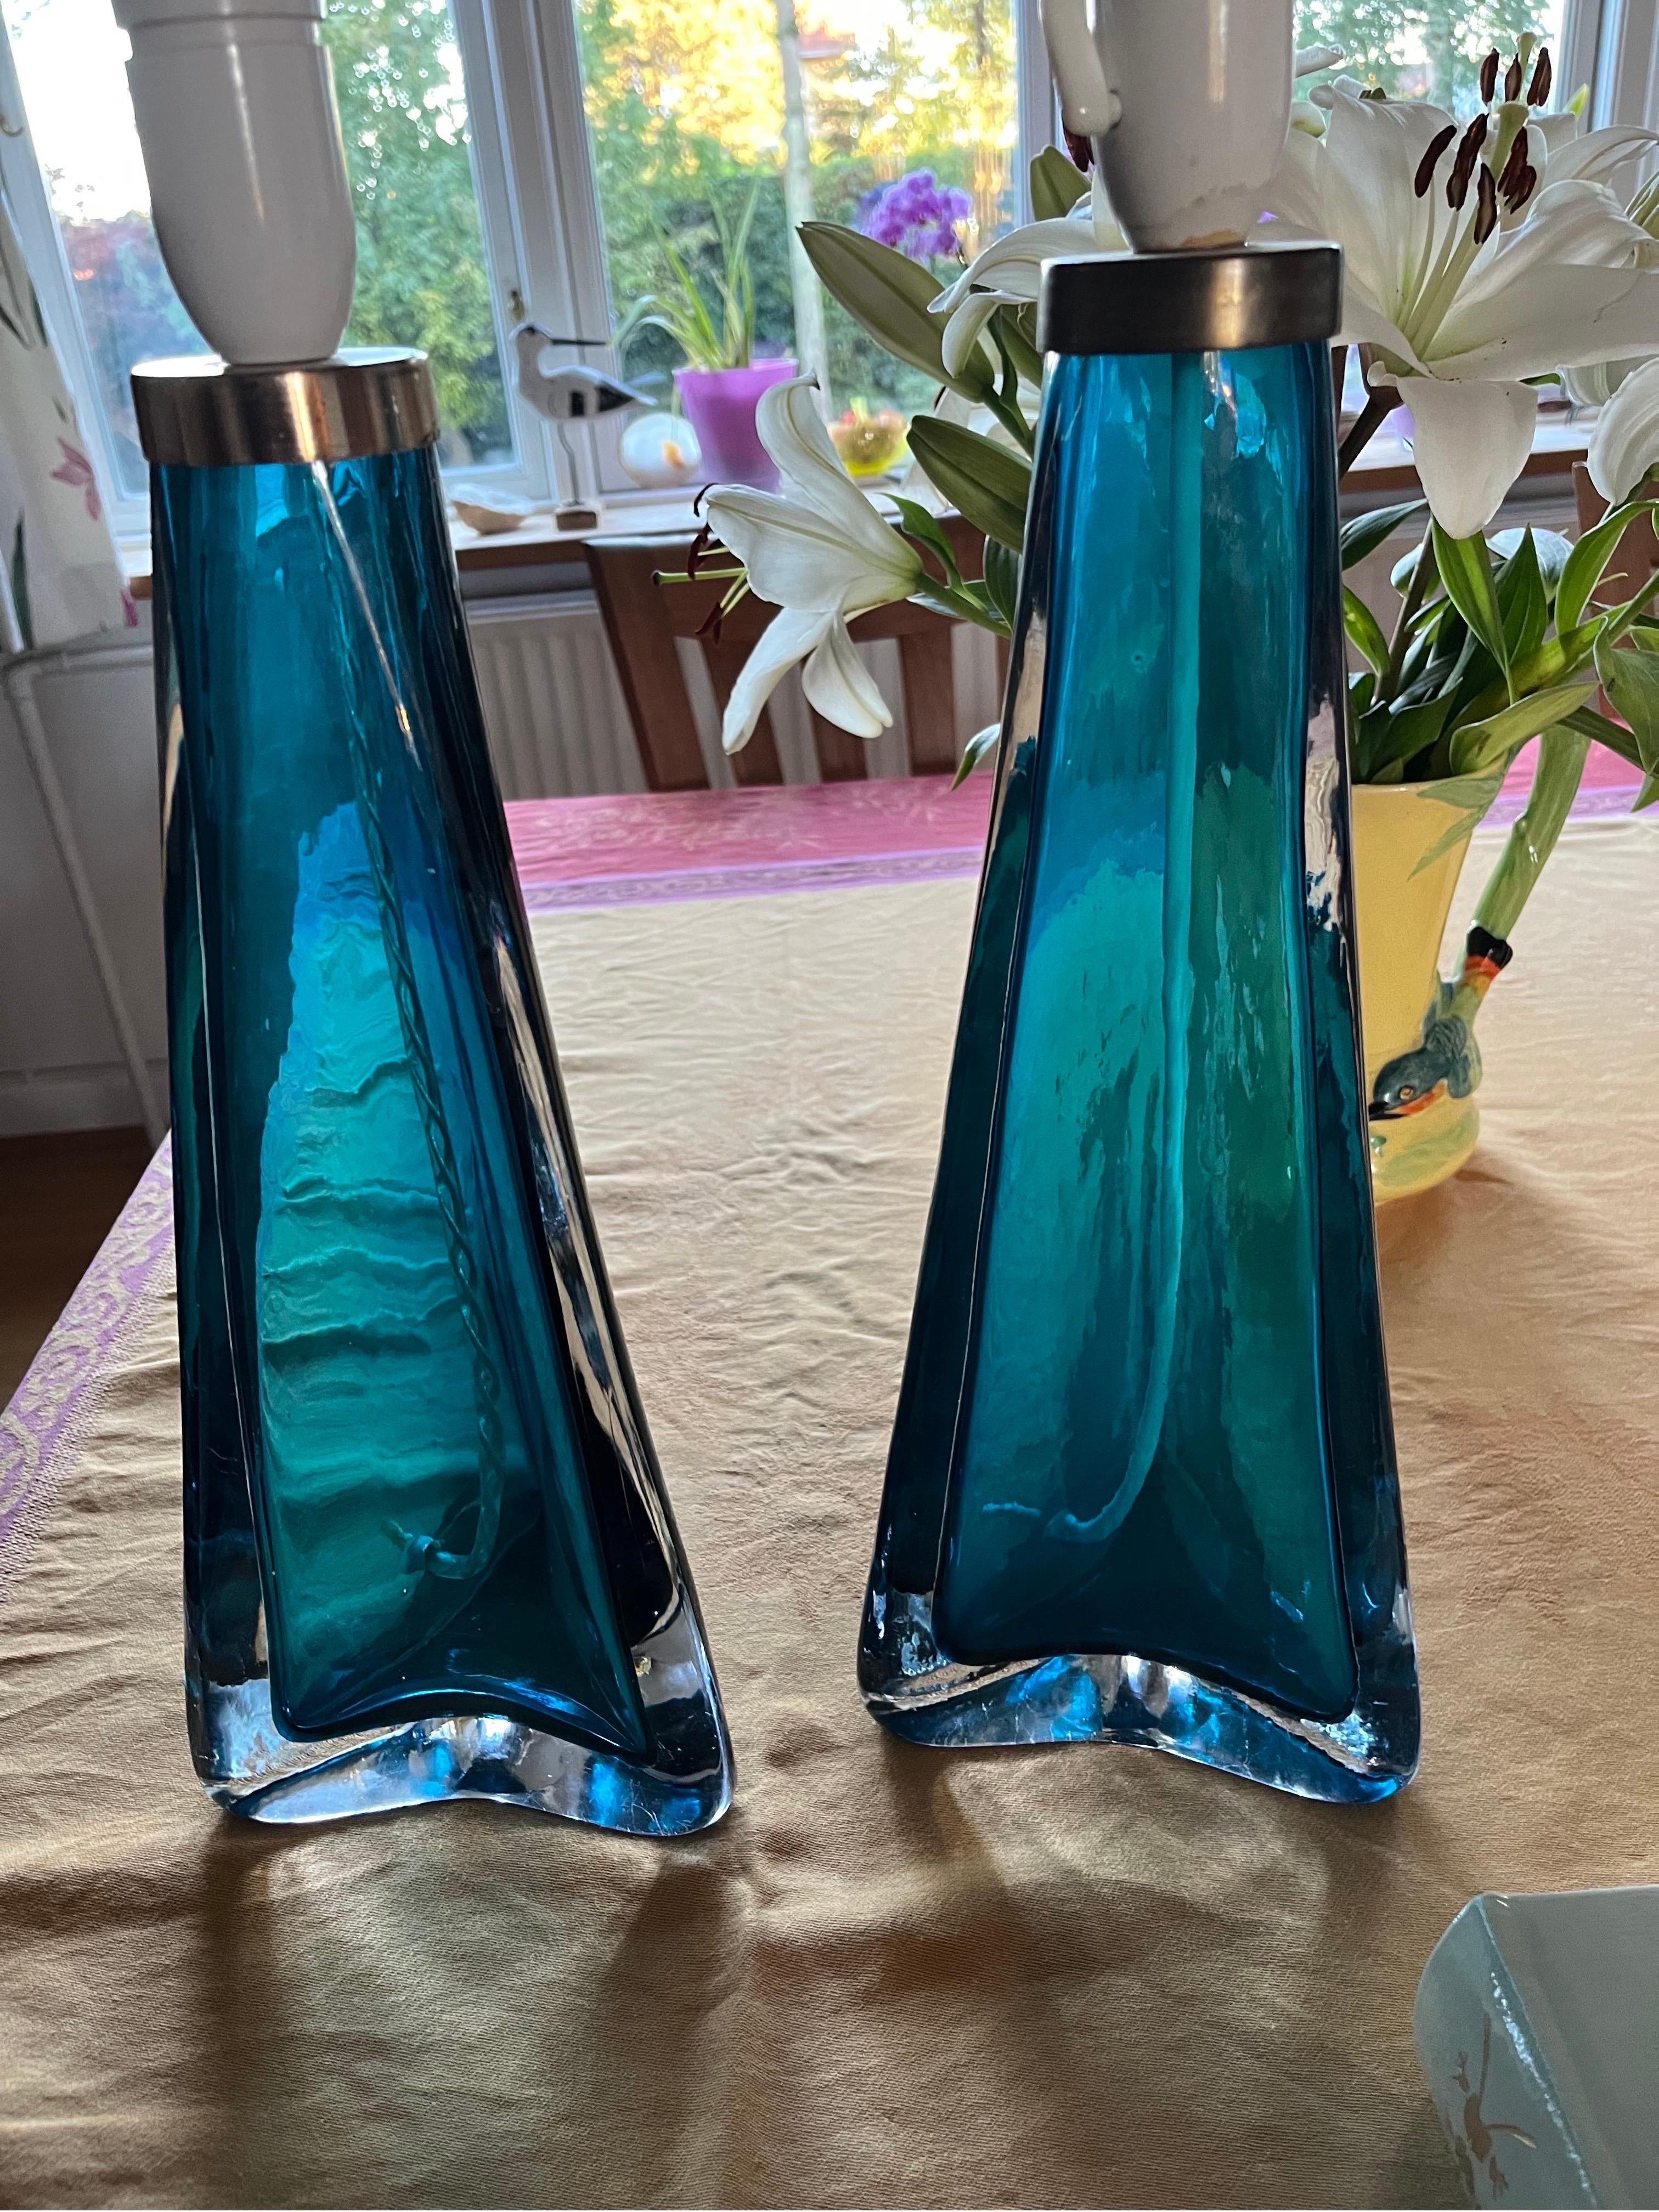 Pair of Caribbean turquoise ocean blue triangular Orrefors lamps, Sweden, 1960 encased in a layer of clear glass with brass fittings, by Carl Fagerlund for Orrefors, 1960.
Highest quality of crystal glass each lamp is very heavy and with a shade